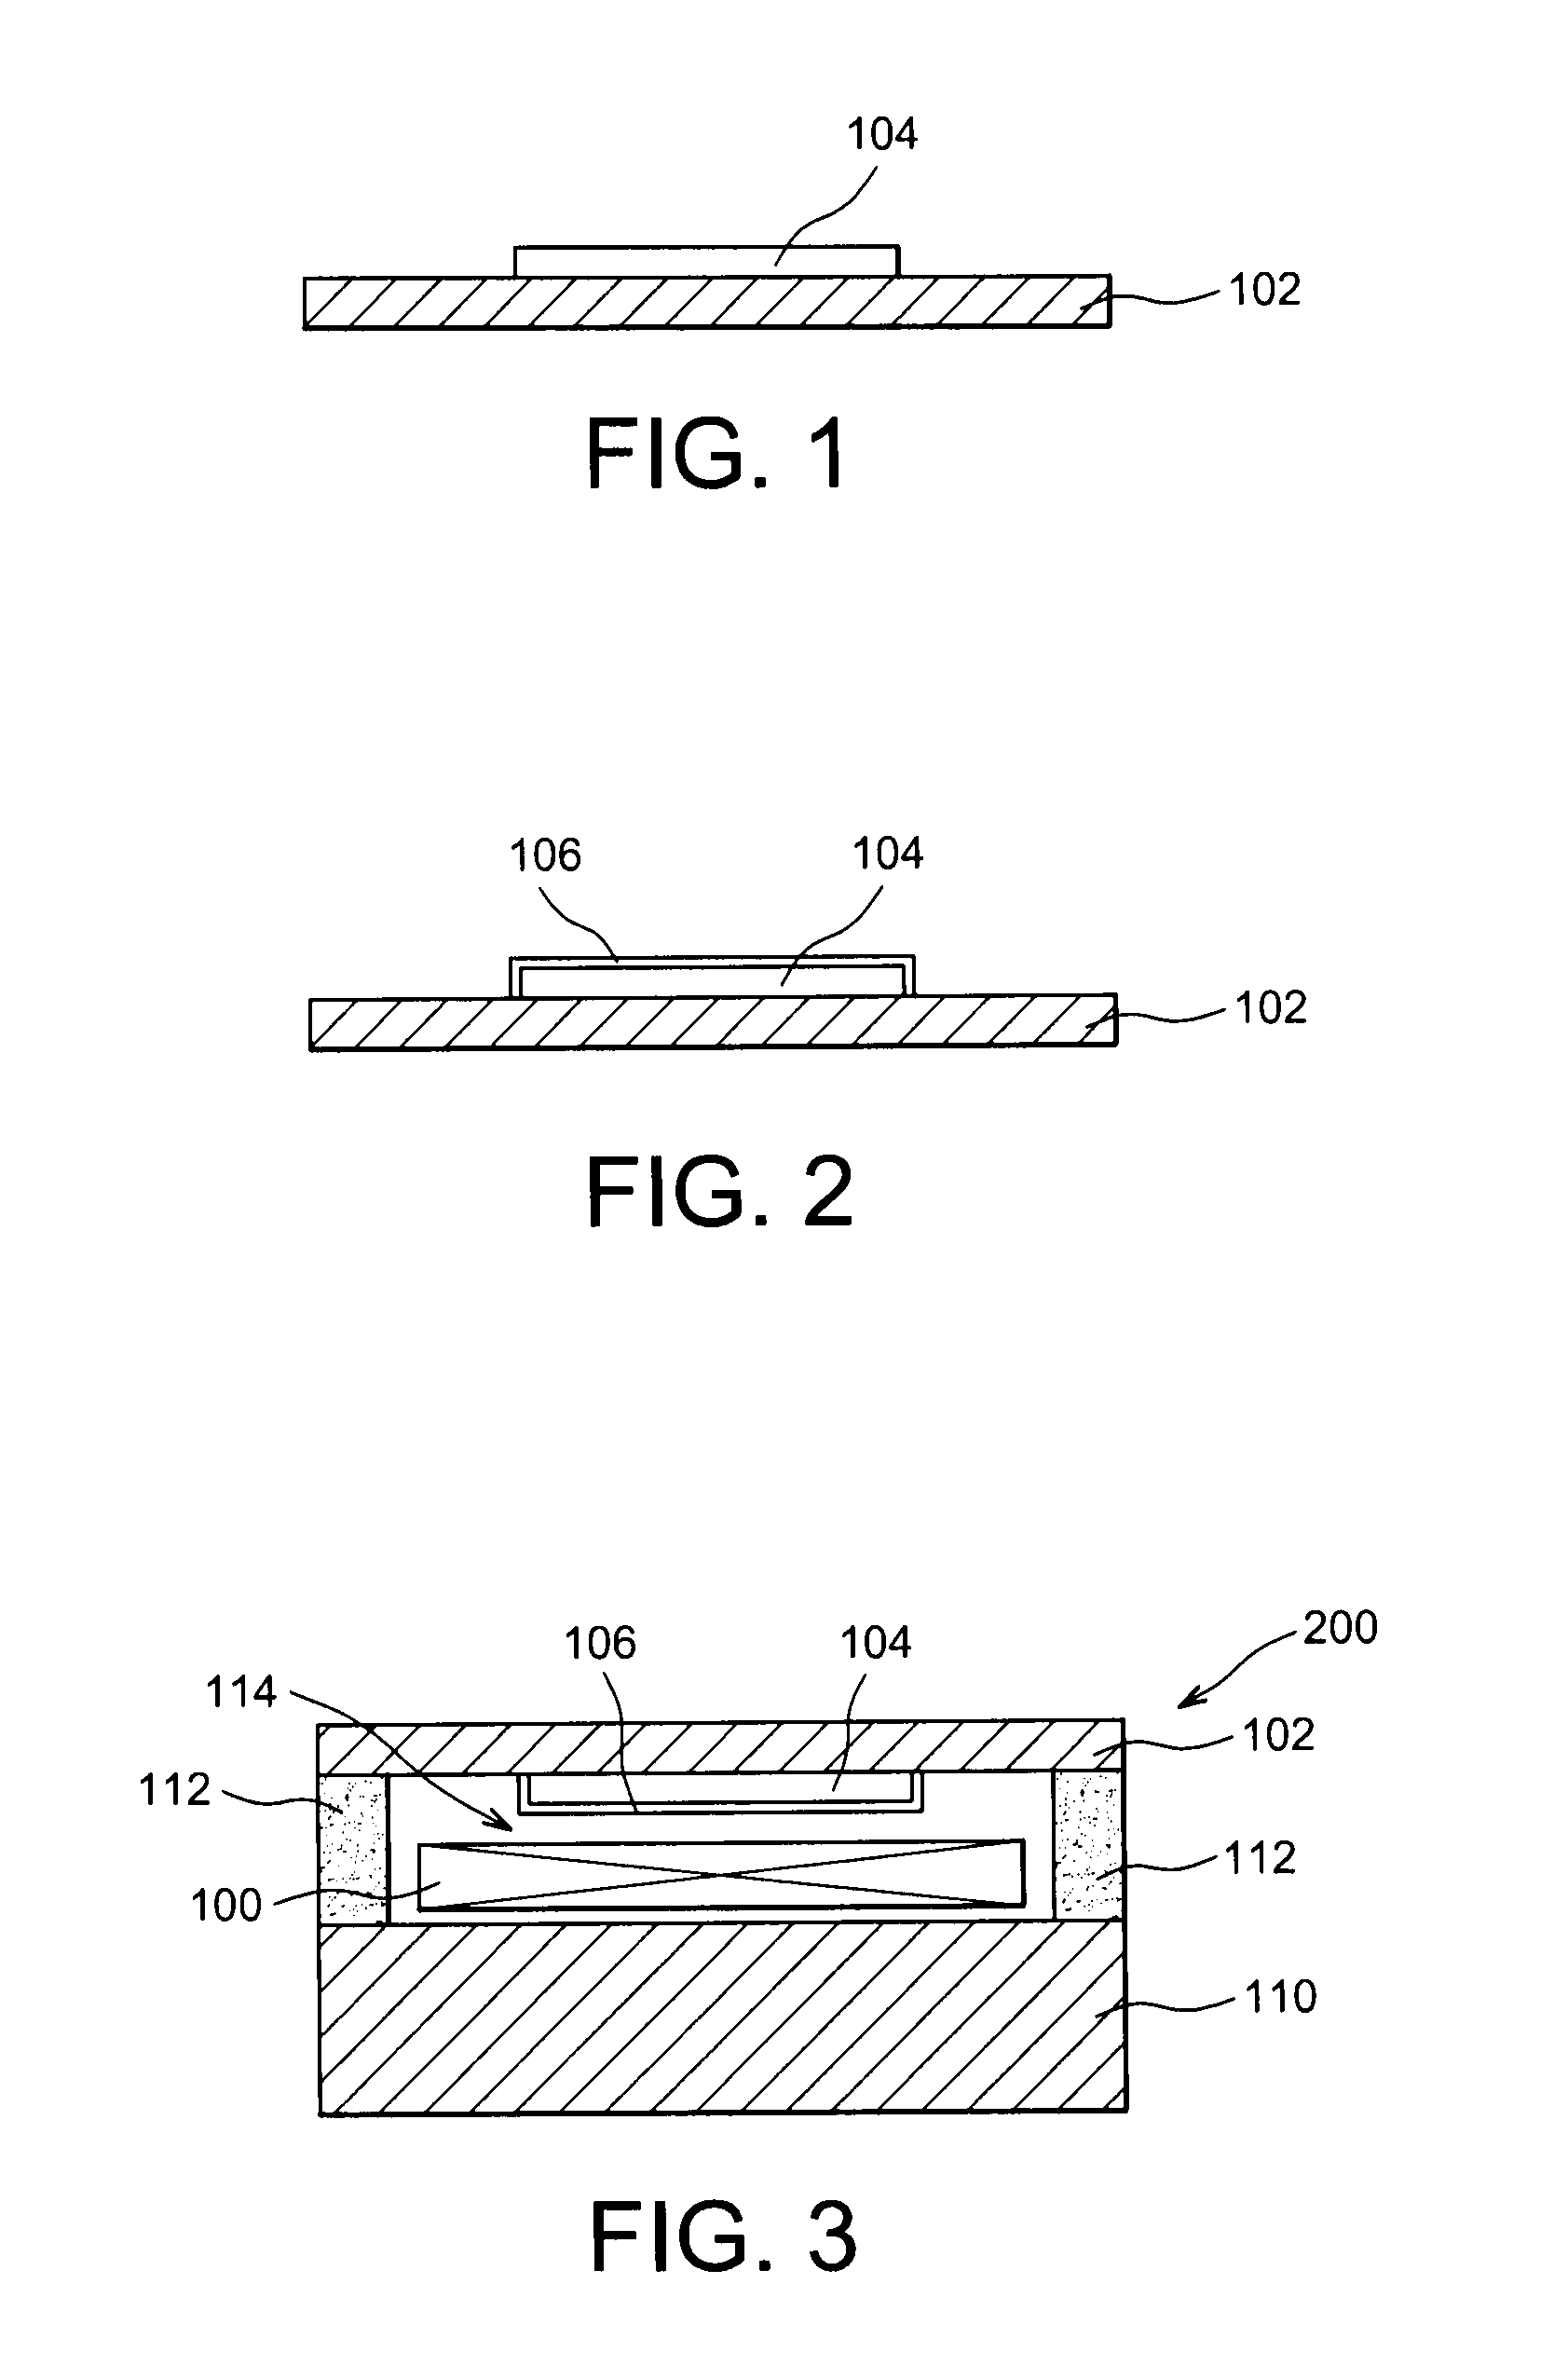 Treatment method of a getter material and encapsulation method of such getter material